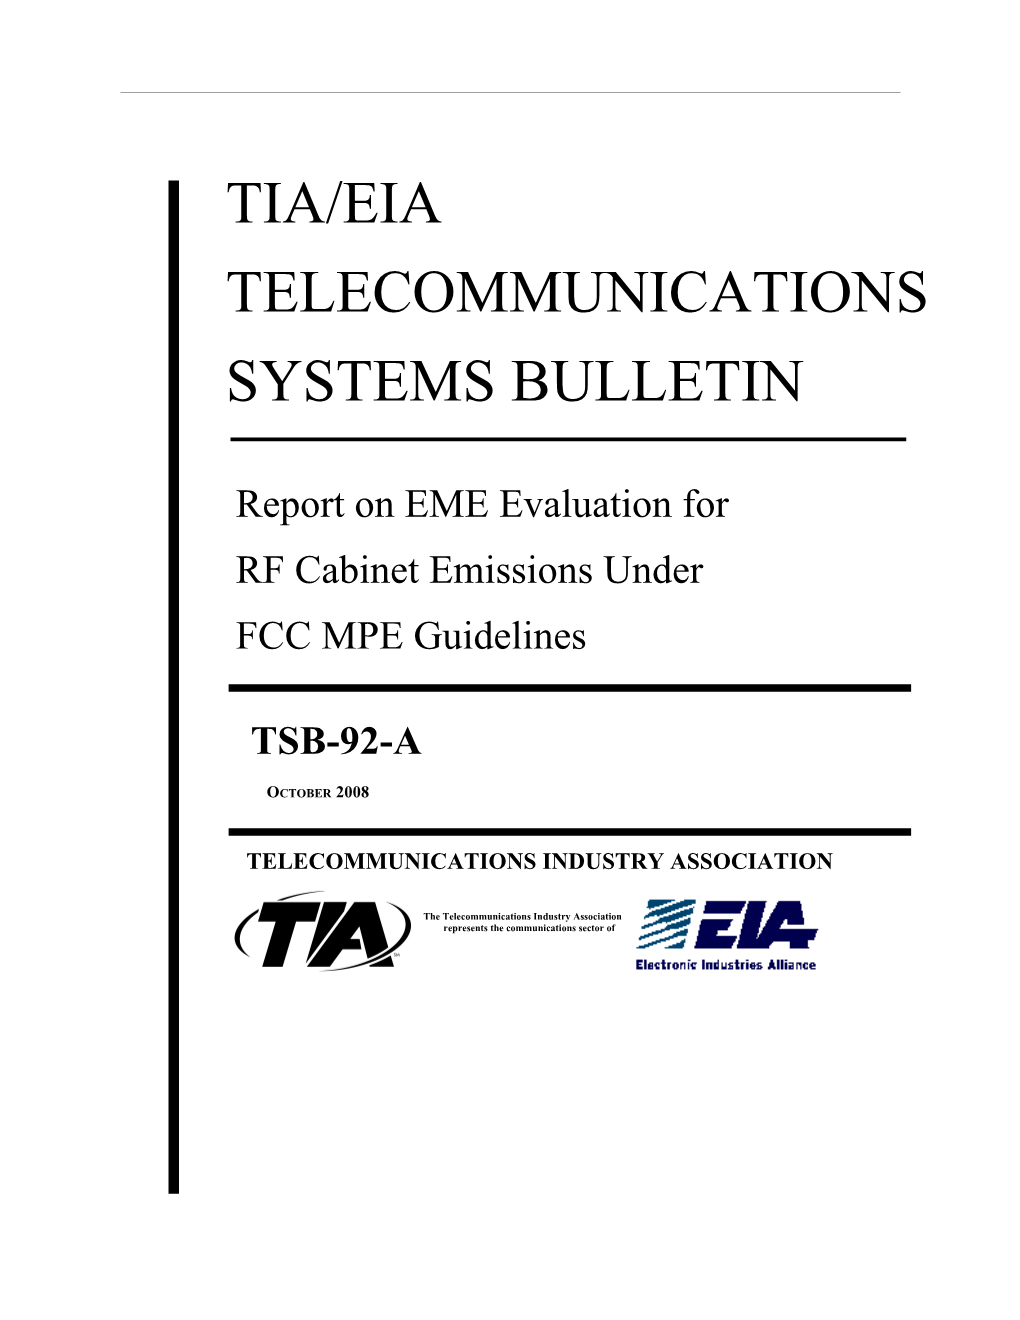 Report on EME Evaluation For